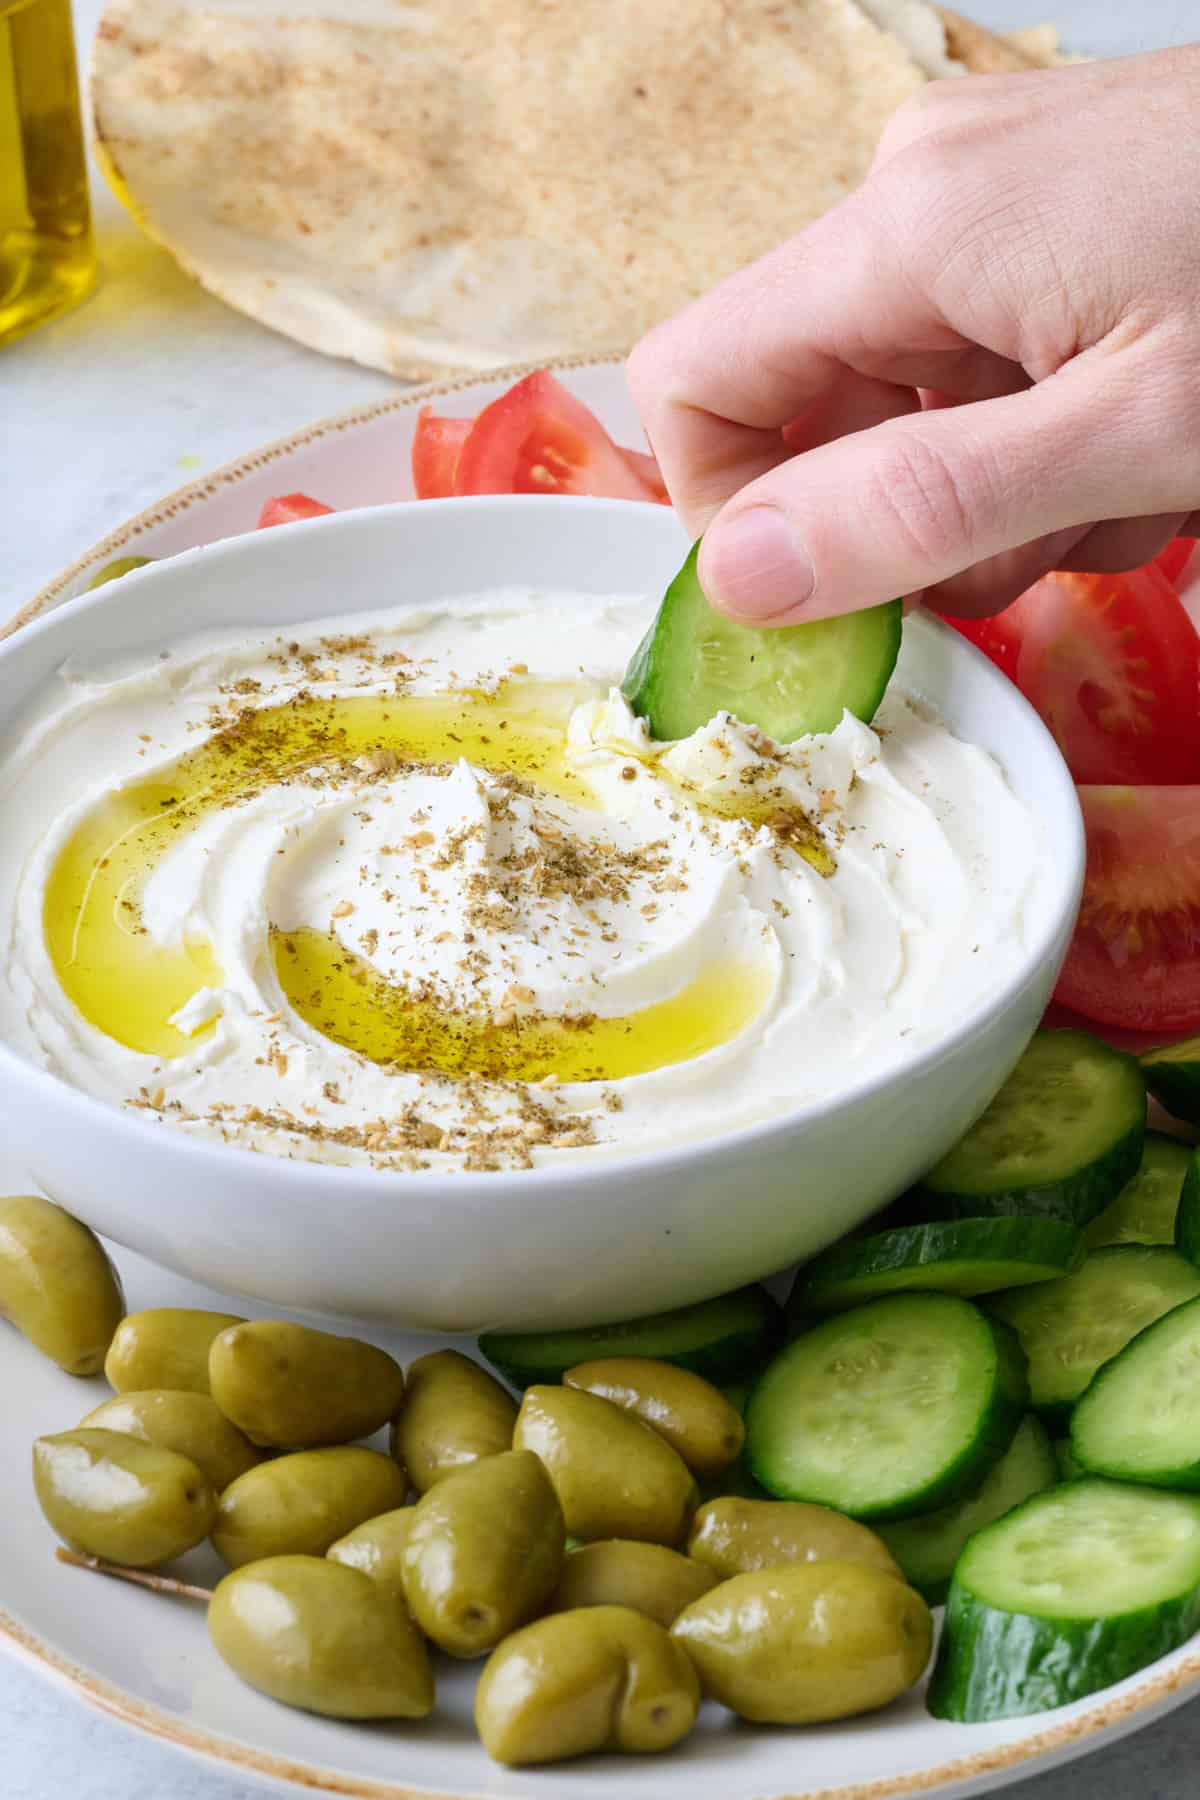 Labneh spread in a bowl with olive oil and zaatar